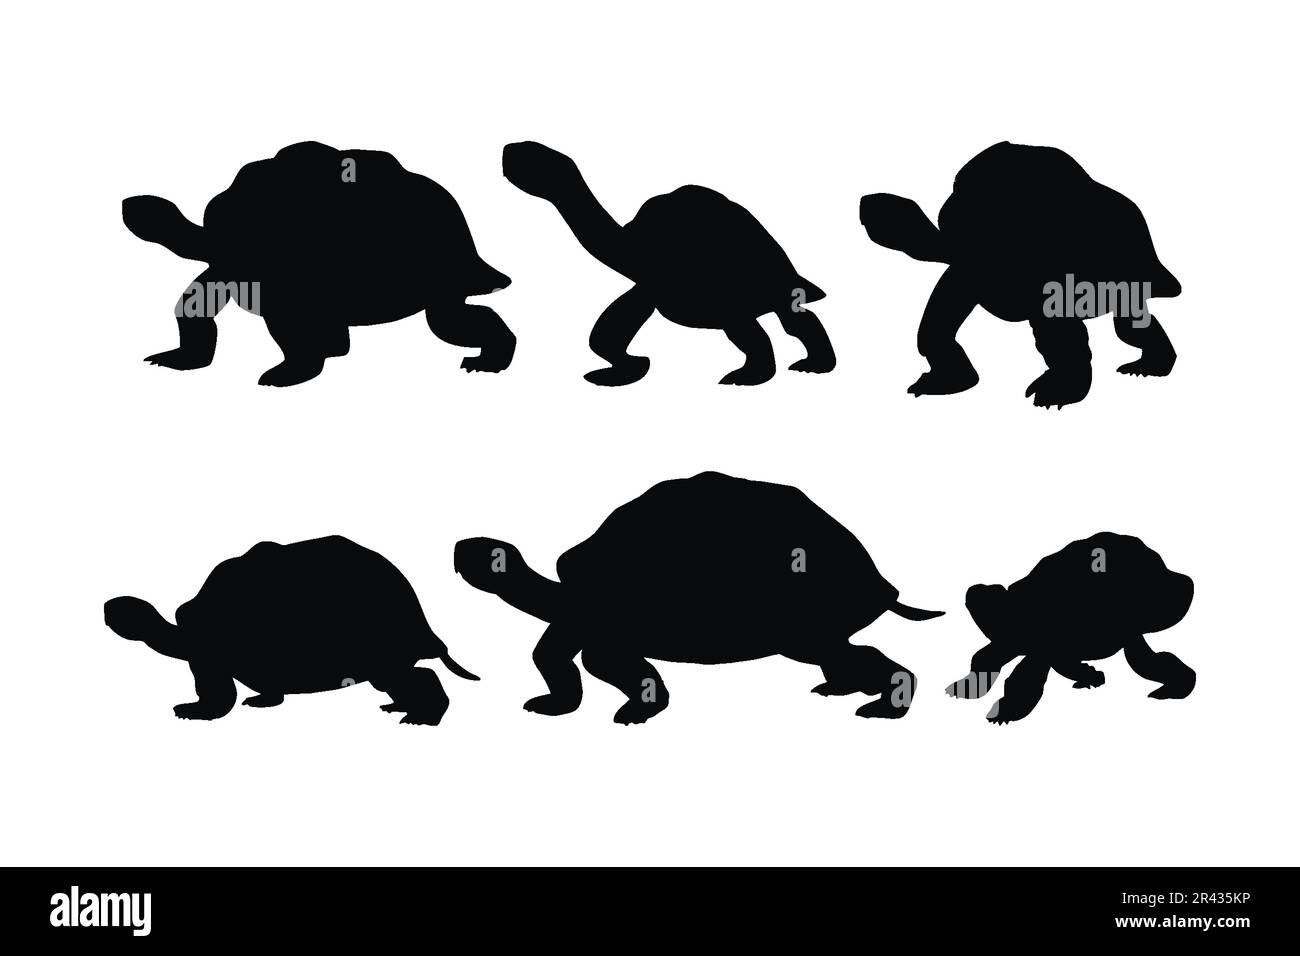 Tortoise walking in different positions, silhouette set vector. Big tortoise silhouette collection on a white background. Wild sea creatures like tort Stock Vector